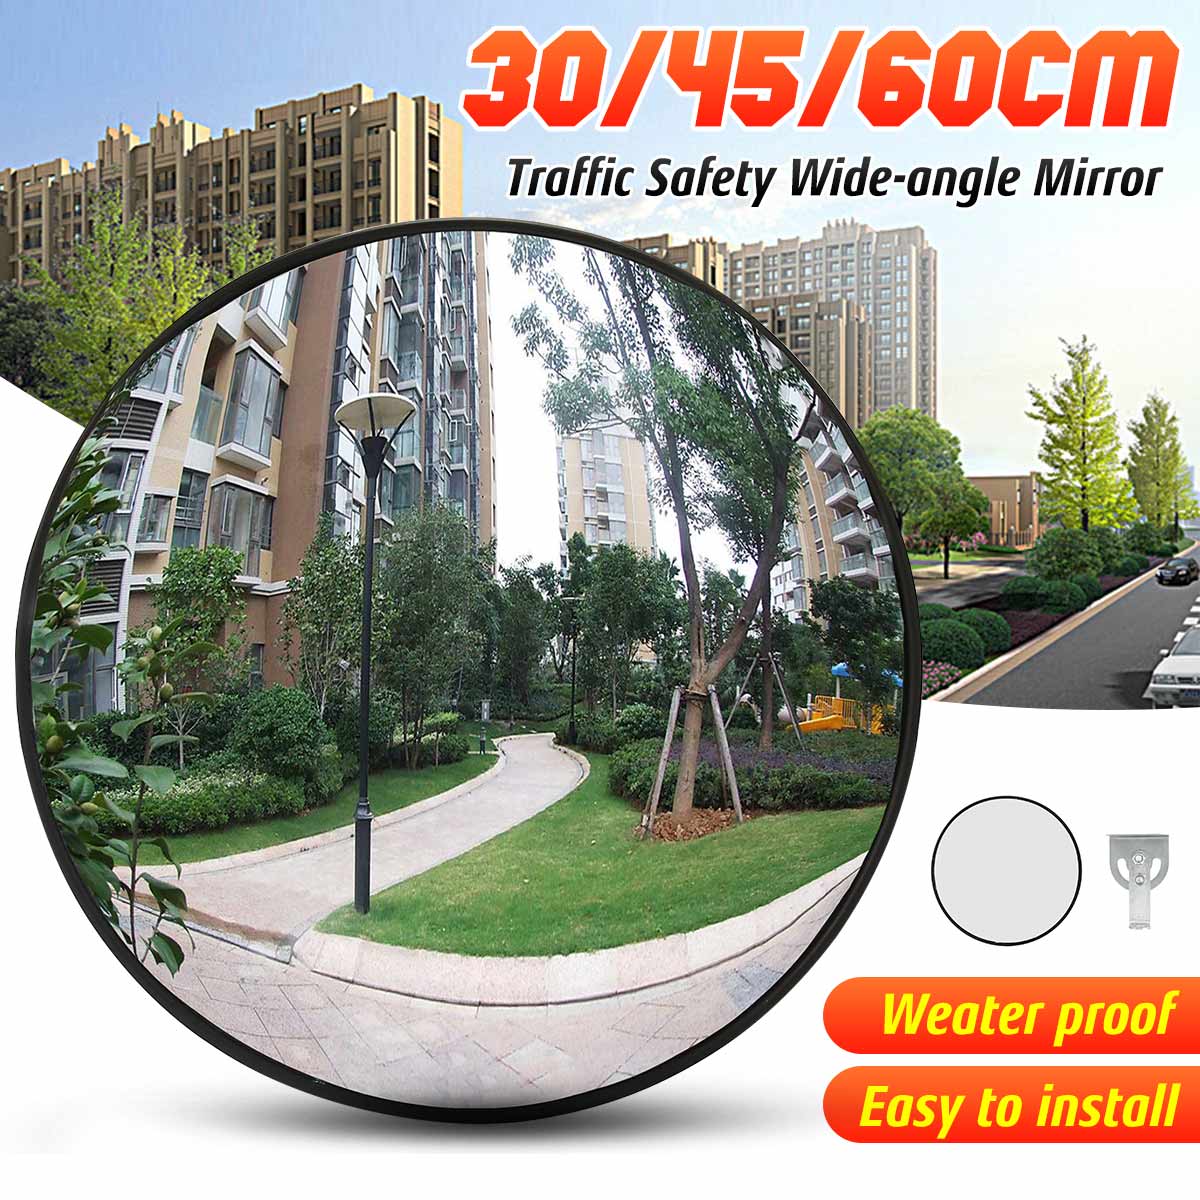 30/45 cm Wide Angle Security Outdoor Convex Road Mirror Traffic Driveway Safety 